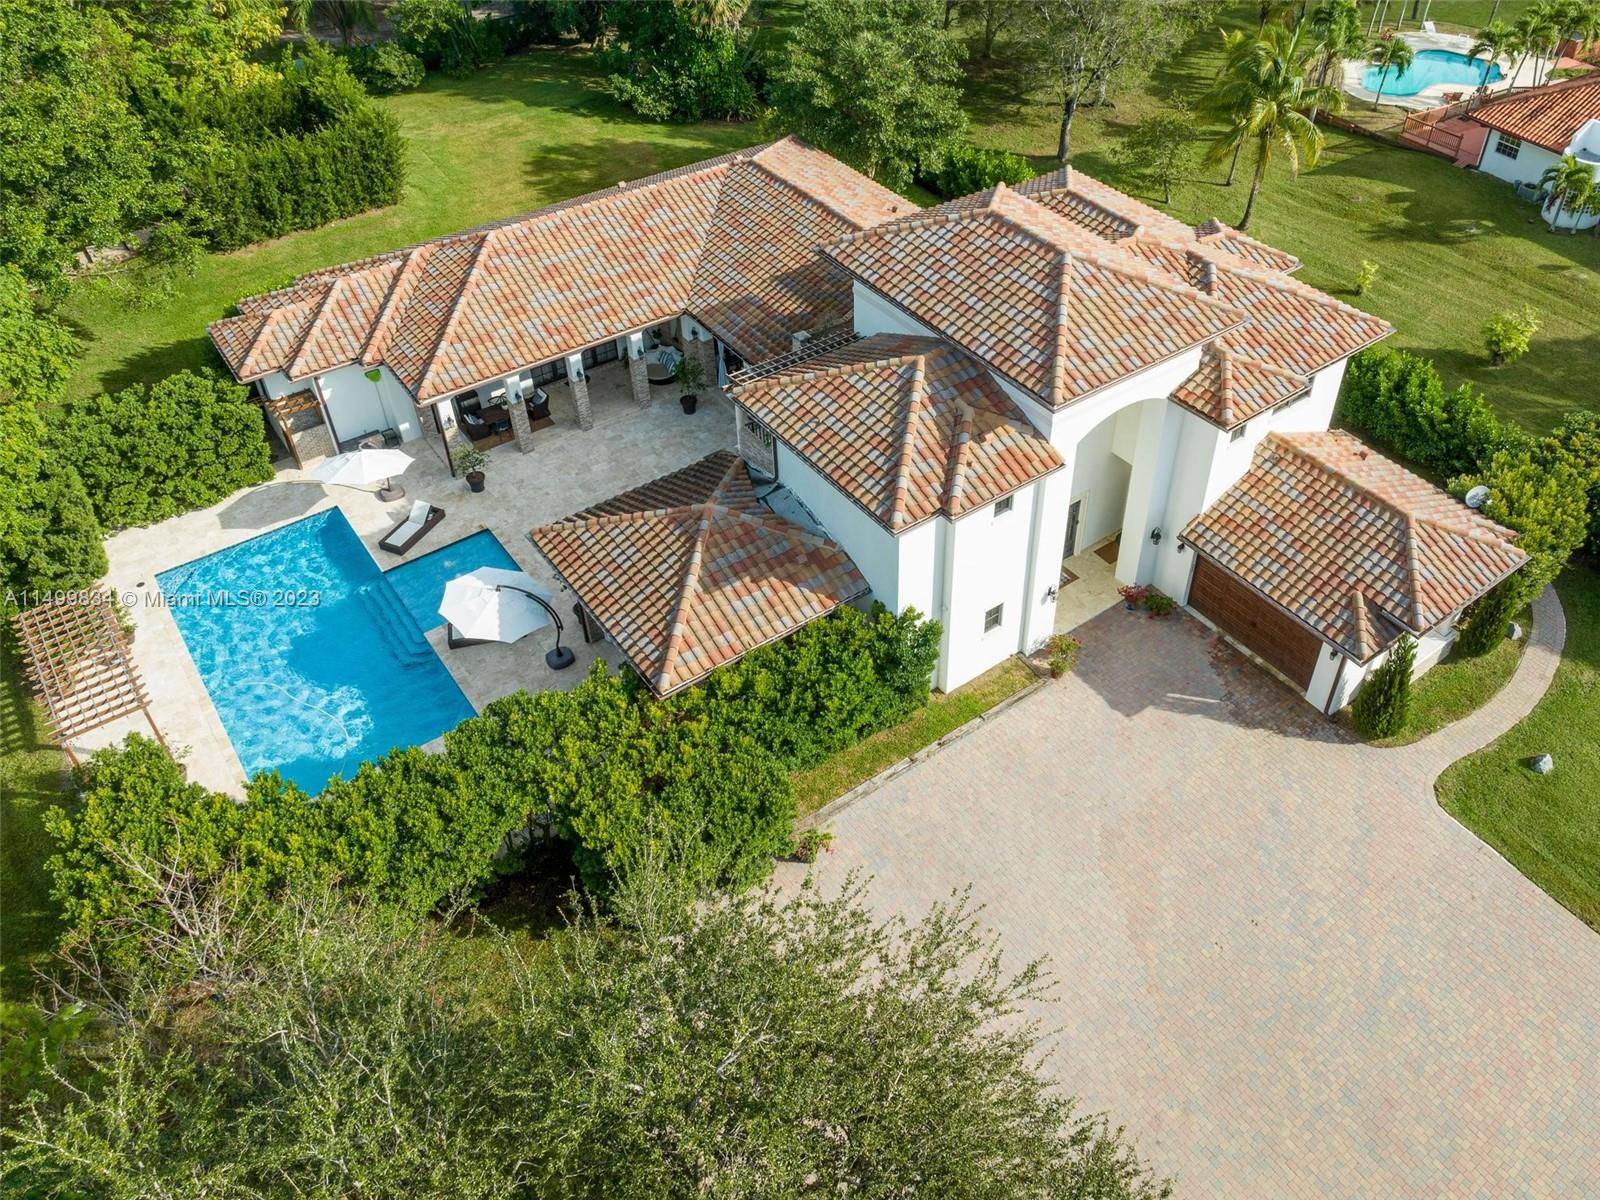 Luxury awaits you at this exquisite custom built mediterranean estate situated on an extremely private, gated, 2.